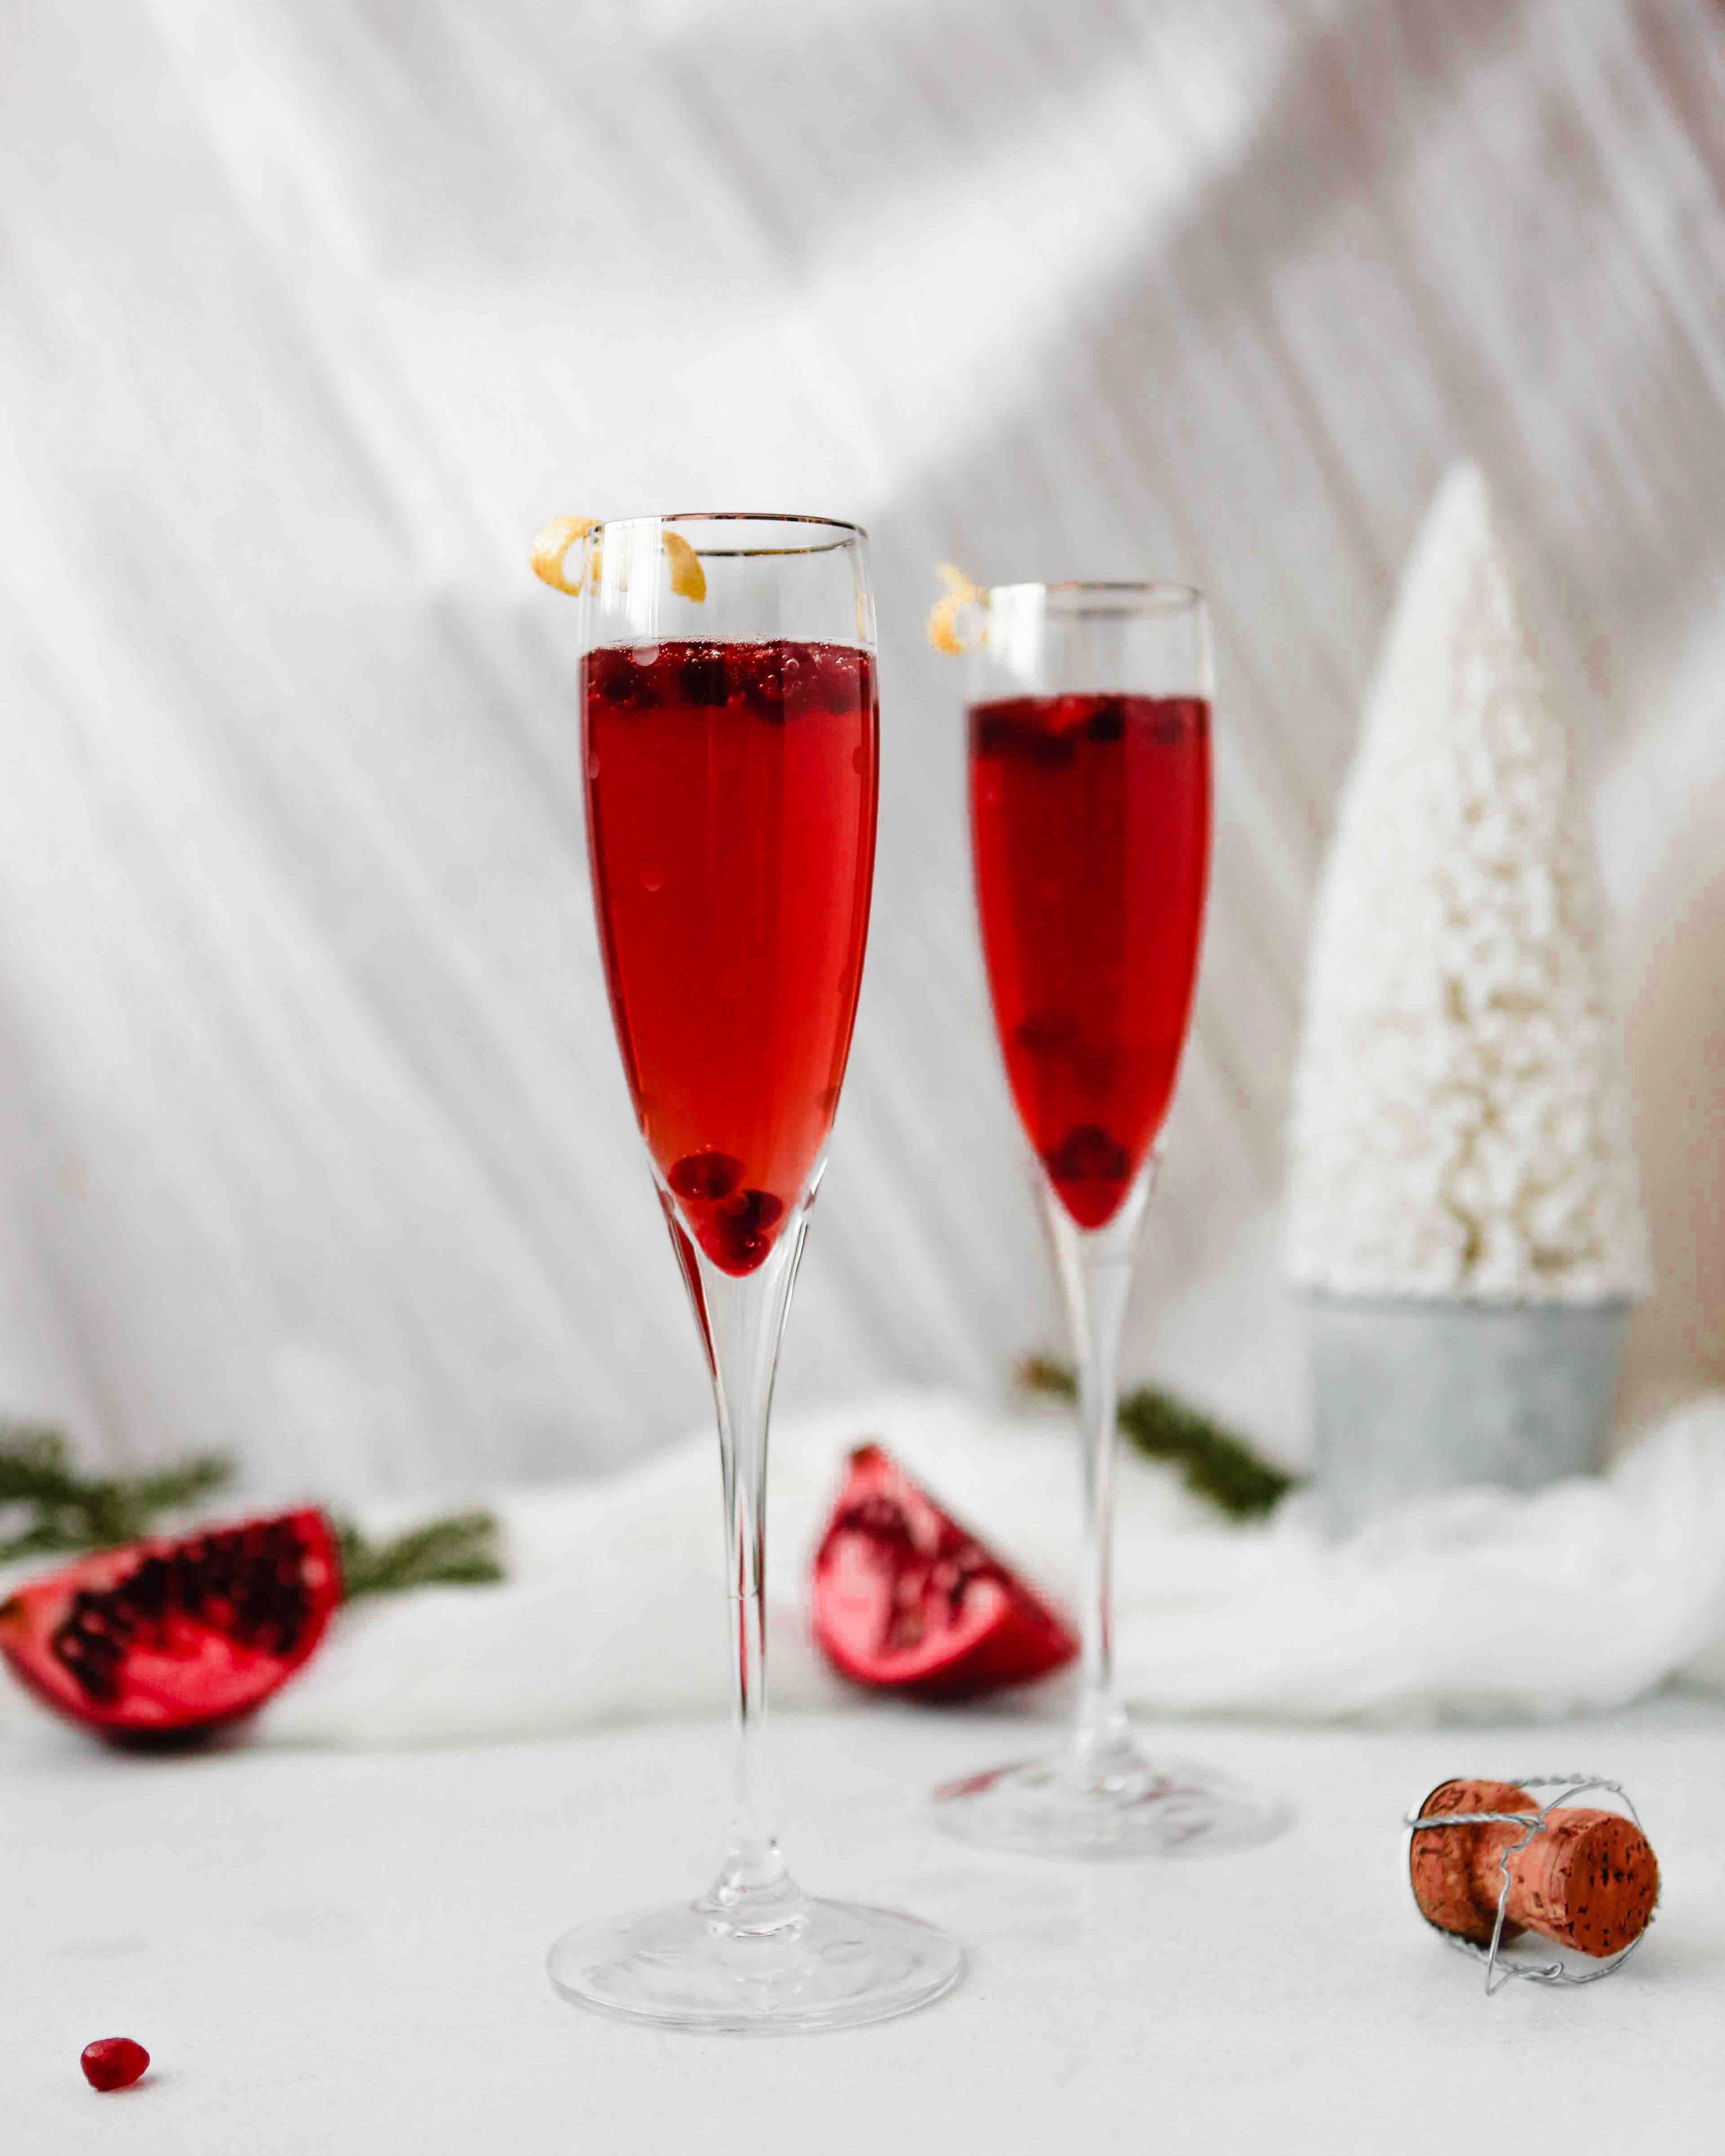 Photograph of pomegranate kir royale cocktail in two flutes, cheersing